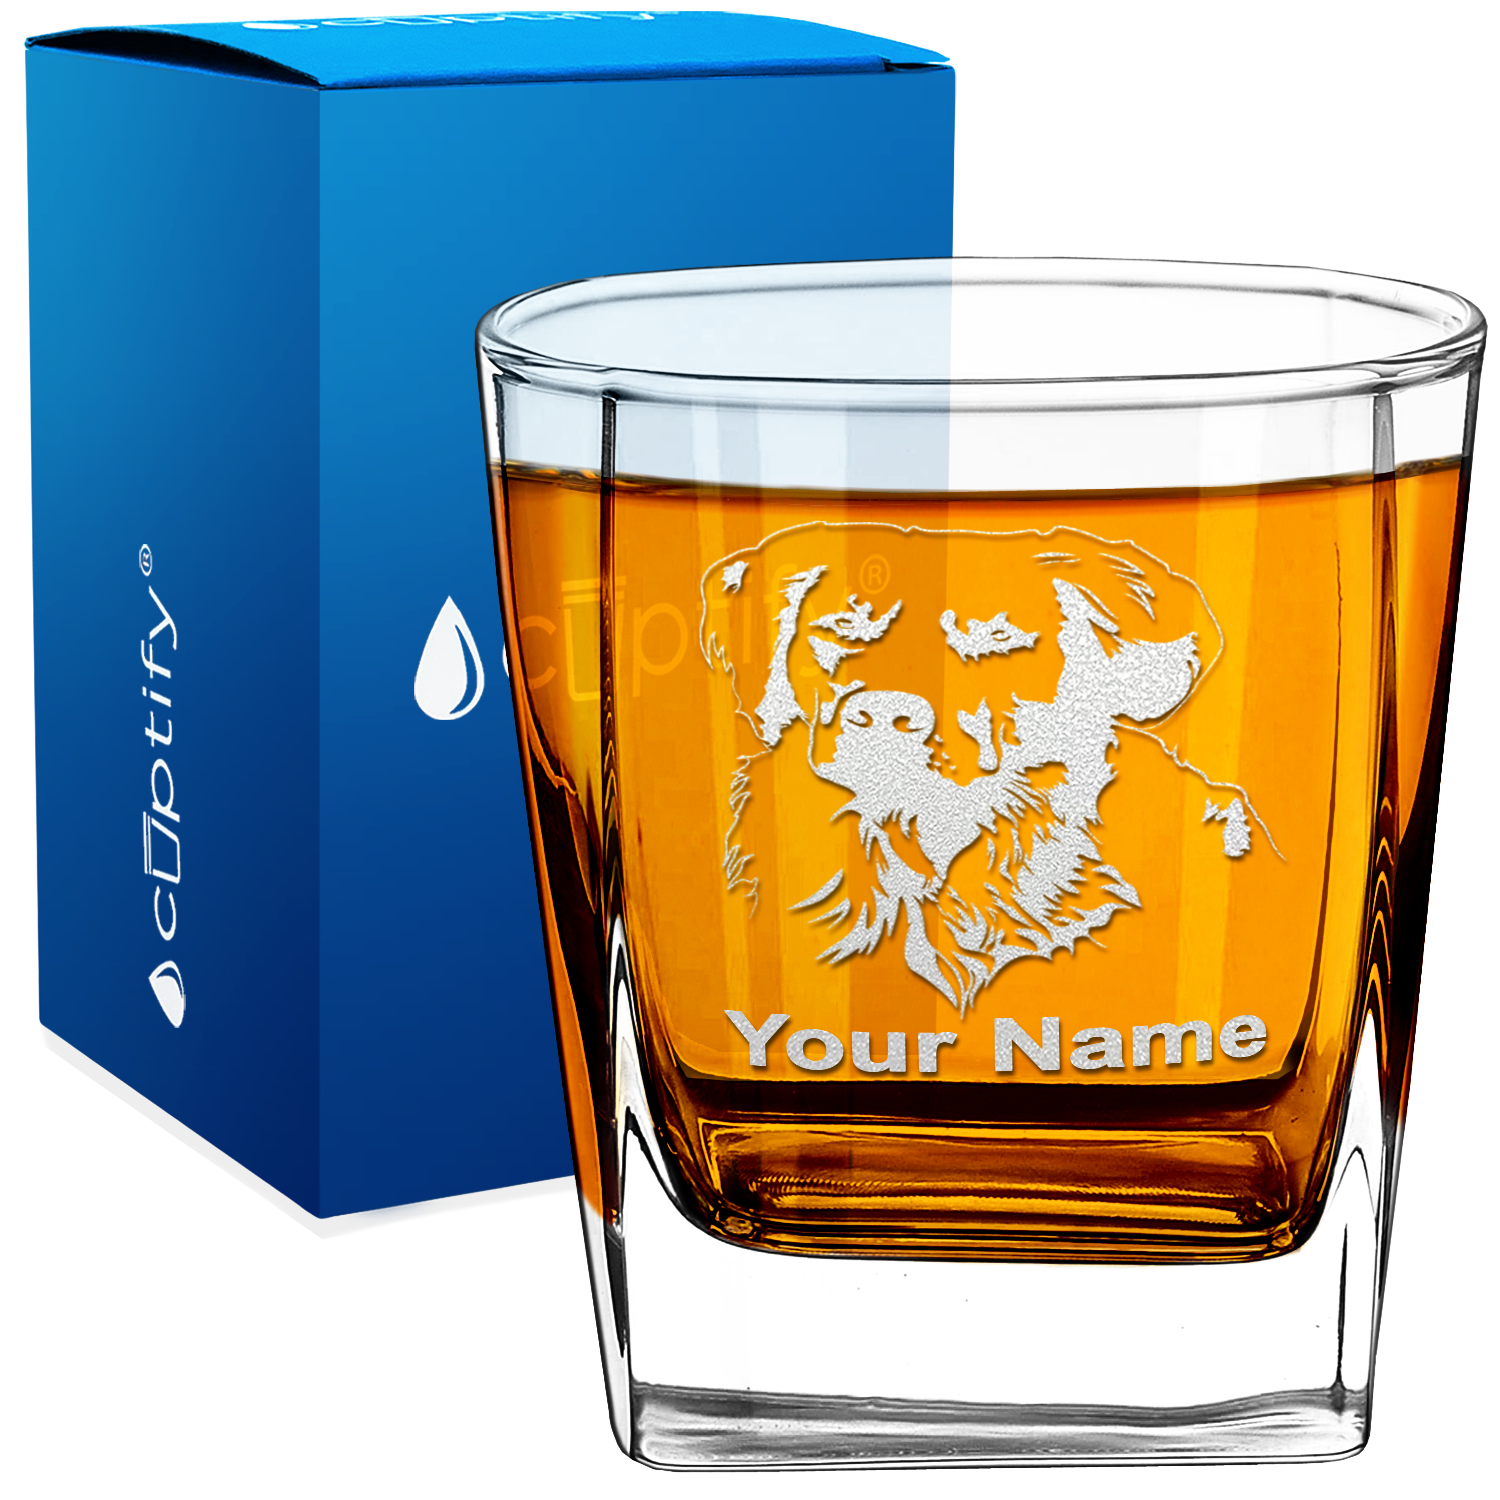 Personalized Golden Retriever on 12oz Double Old Fashioned Glass